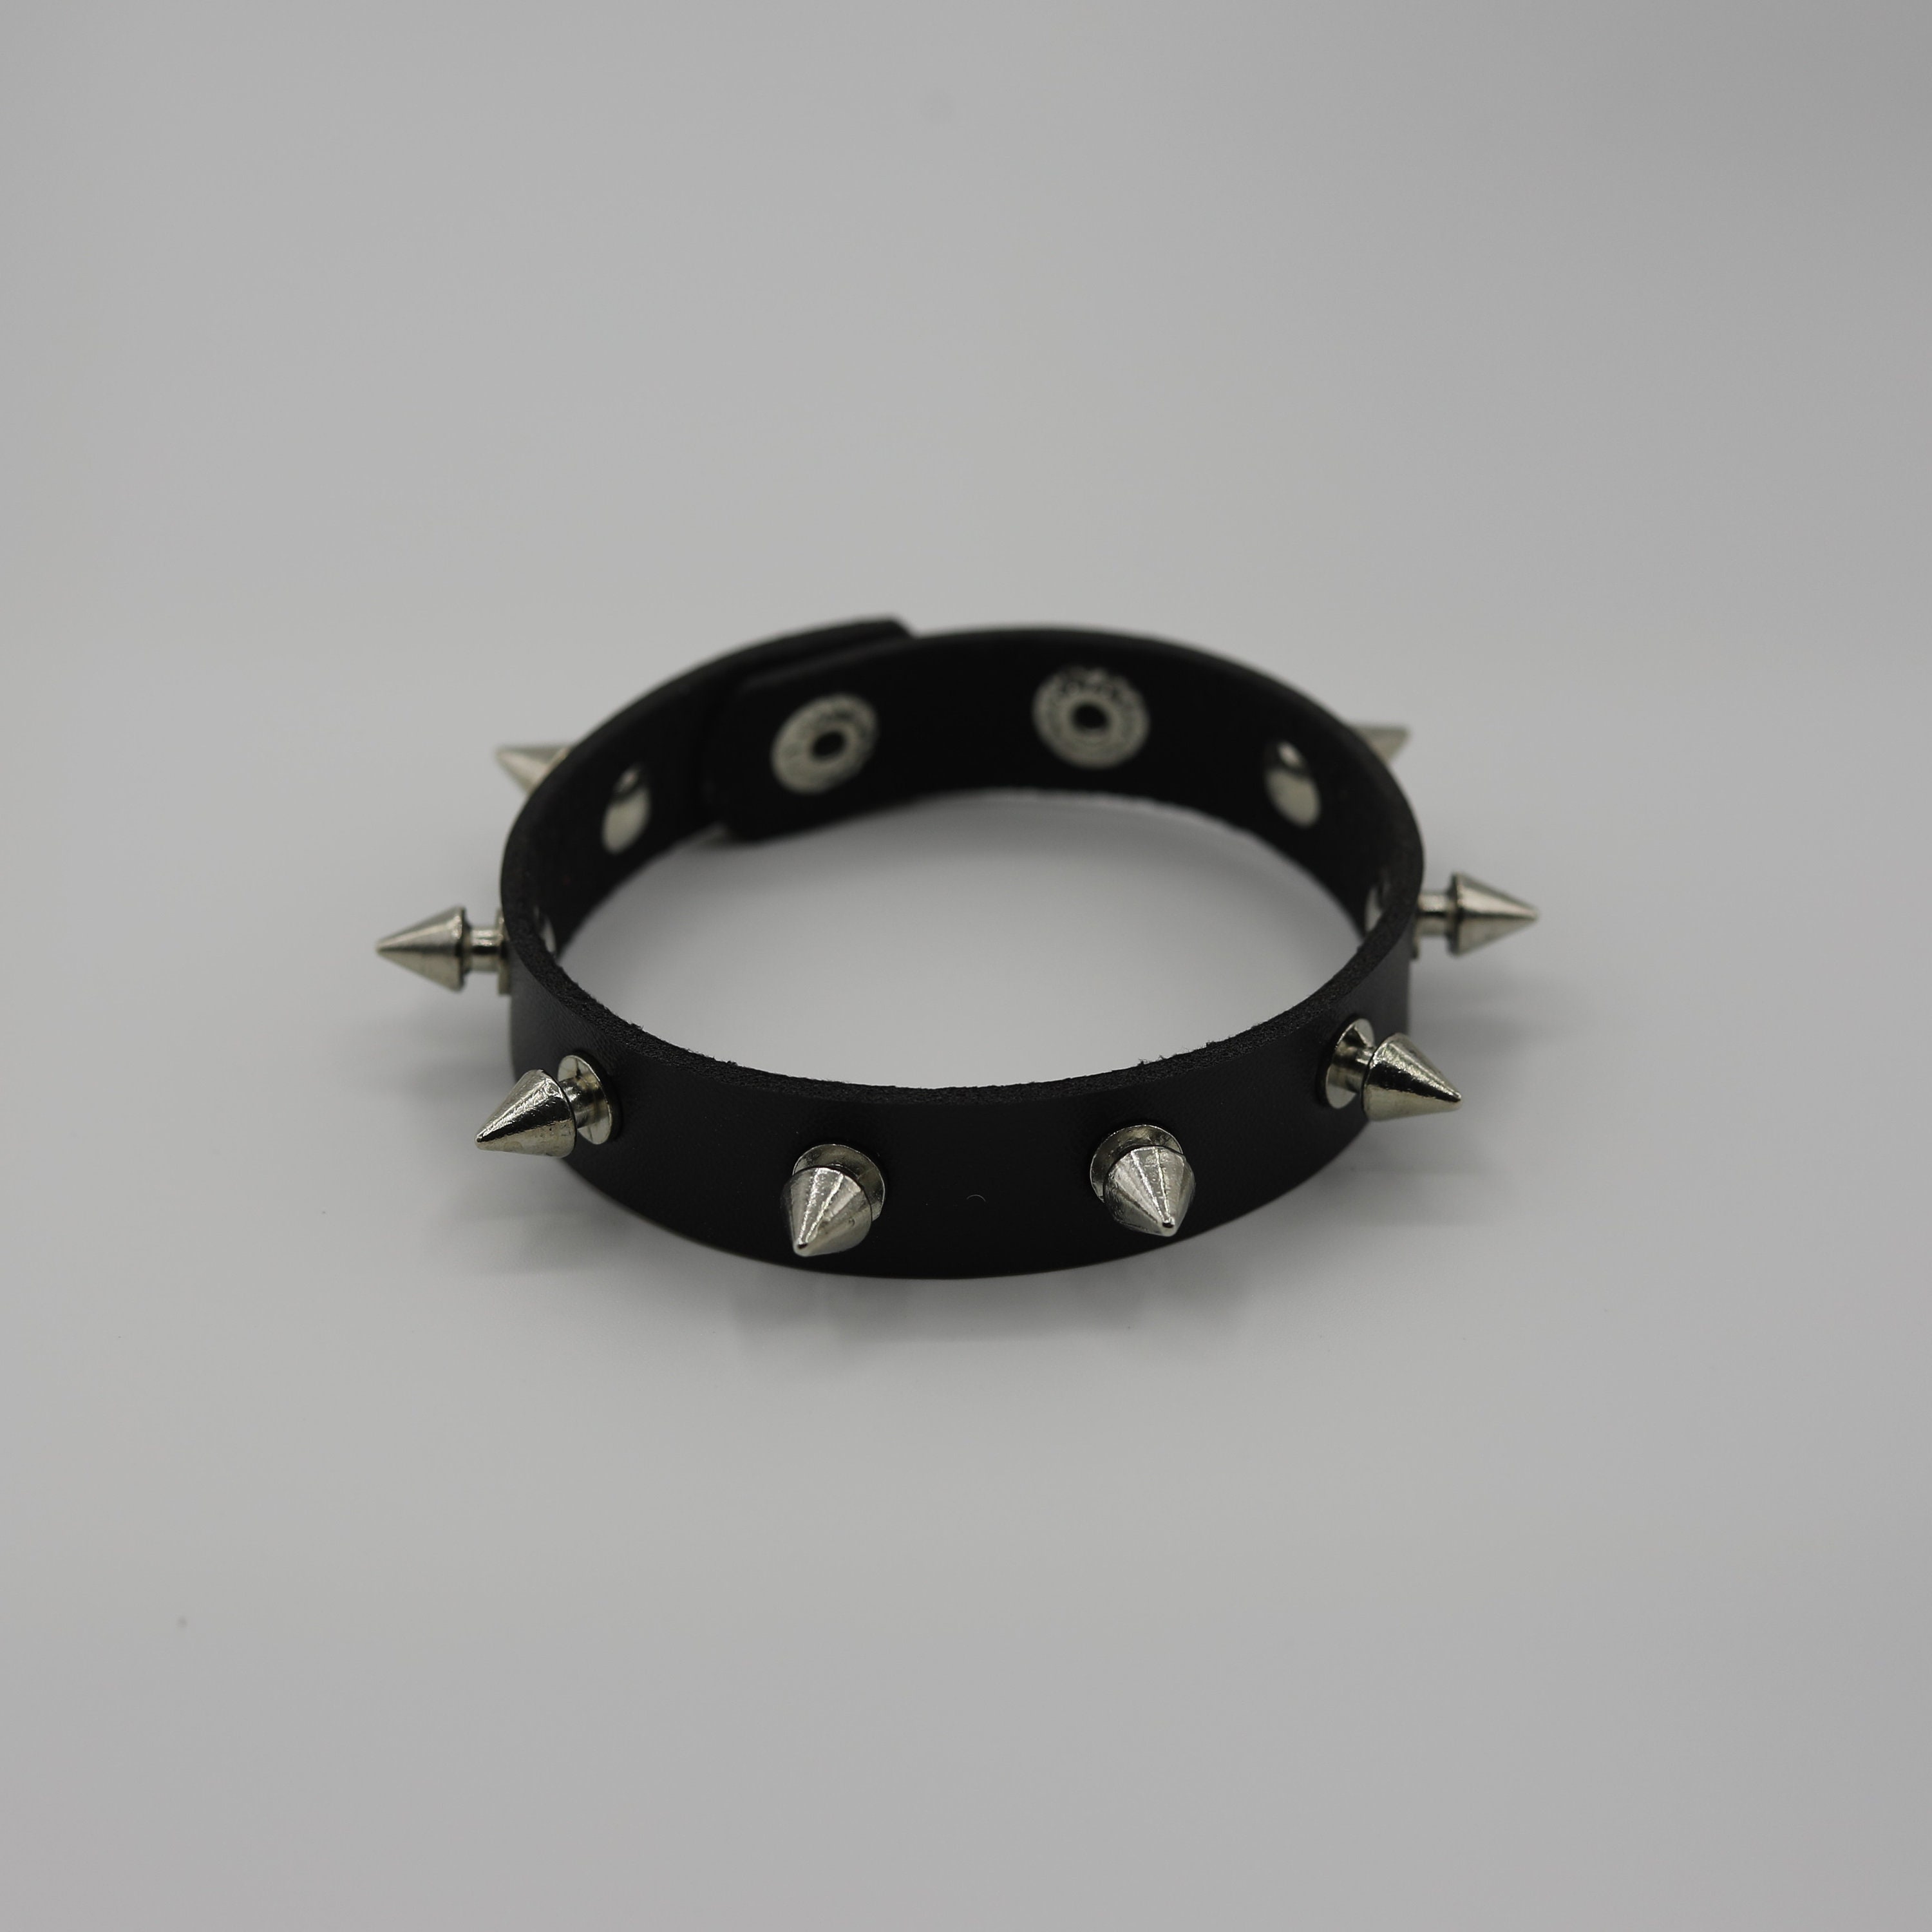 MILAKOO Goth Punk Accessories Leather Spike Studded Cosplay Costume Spike  Bracelet